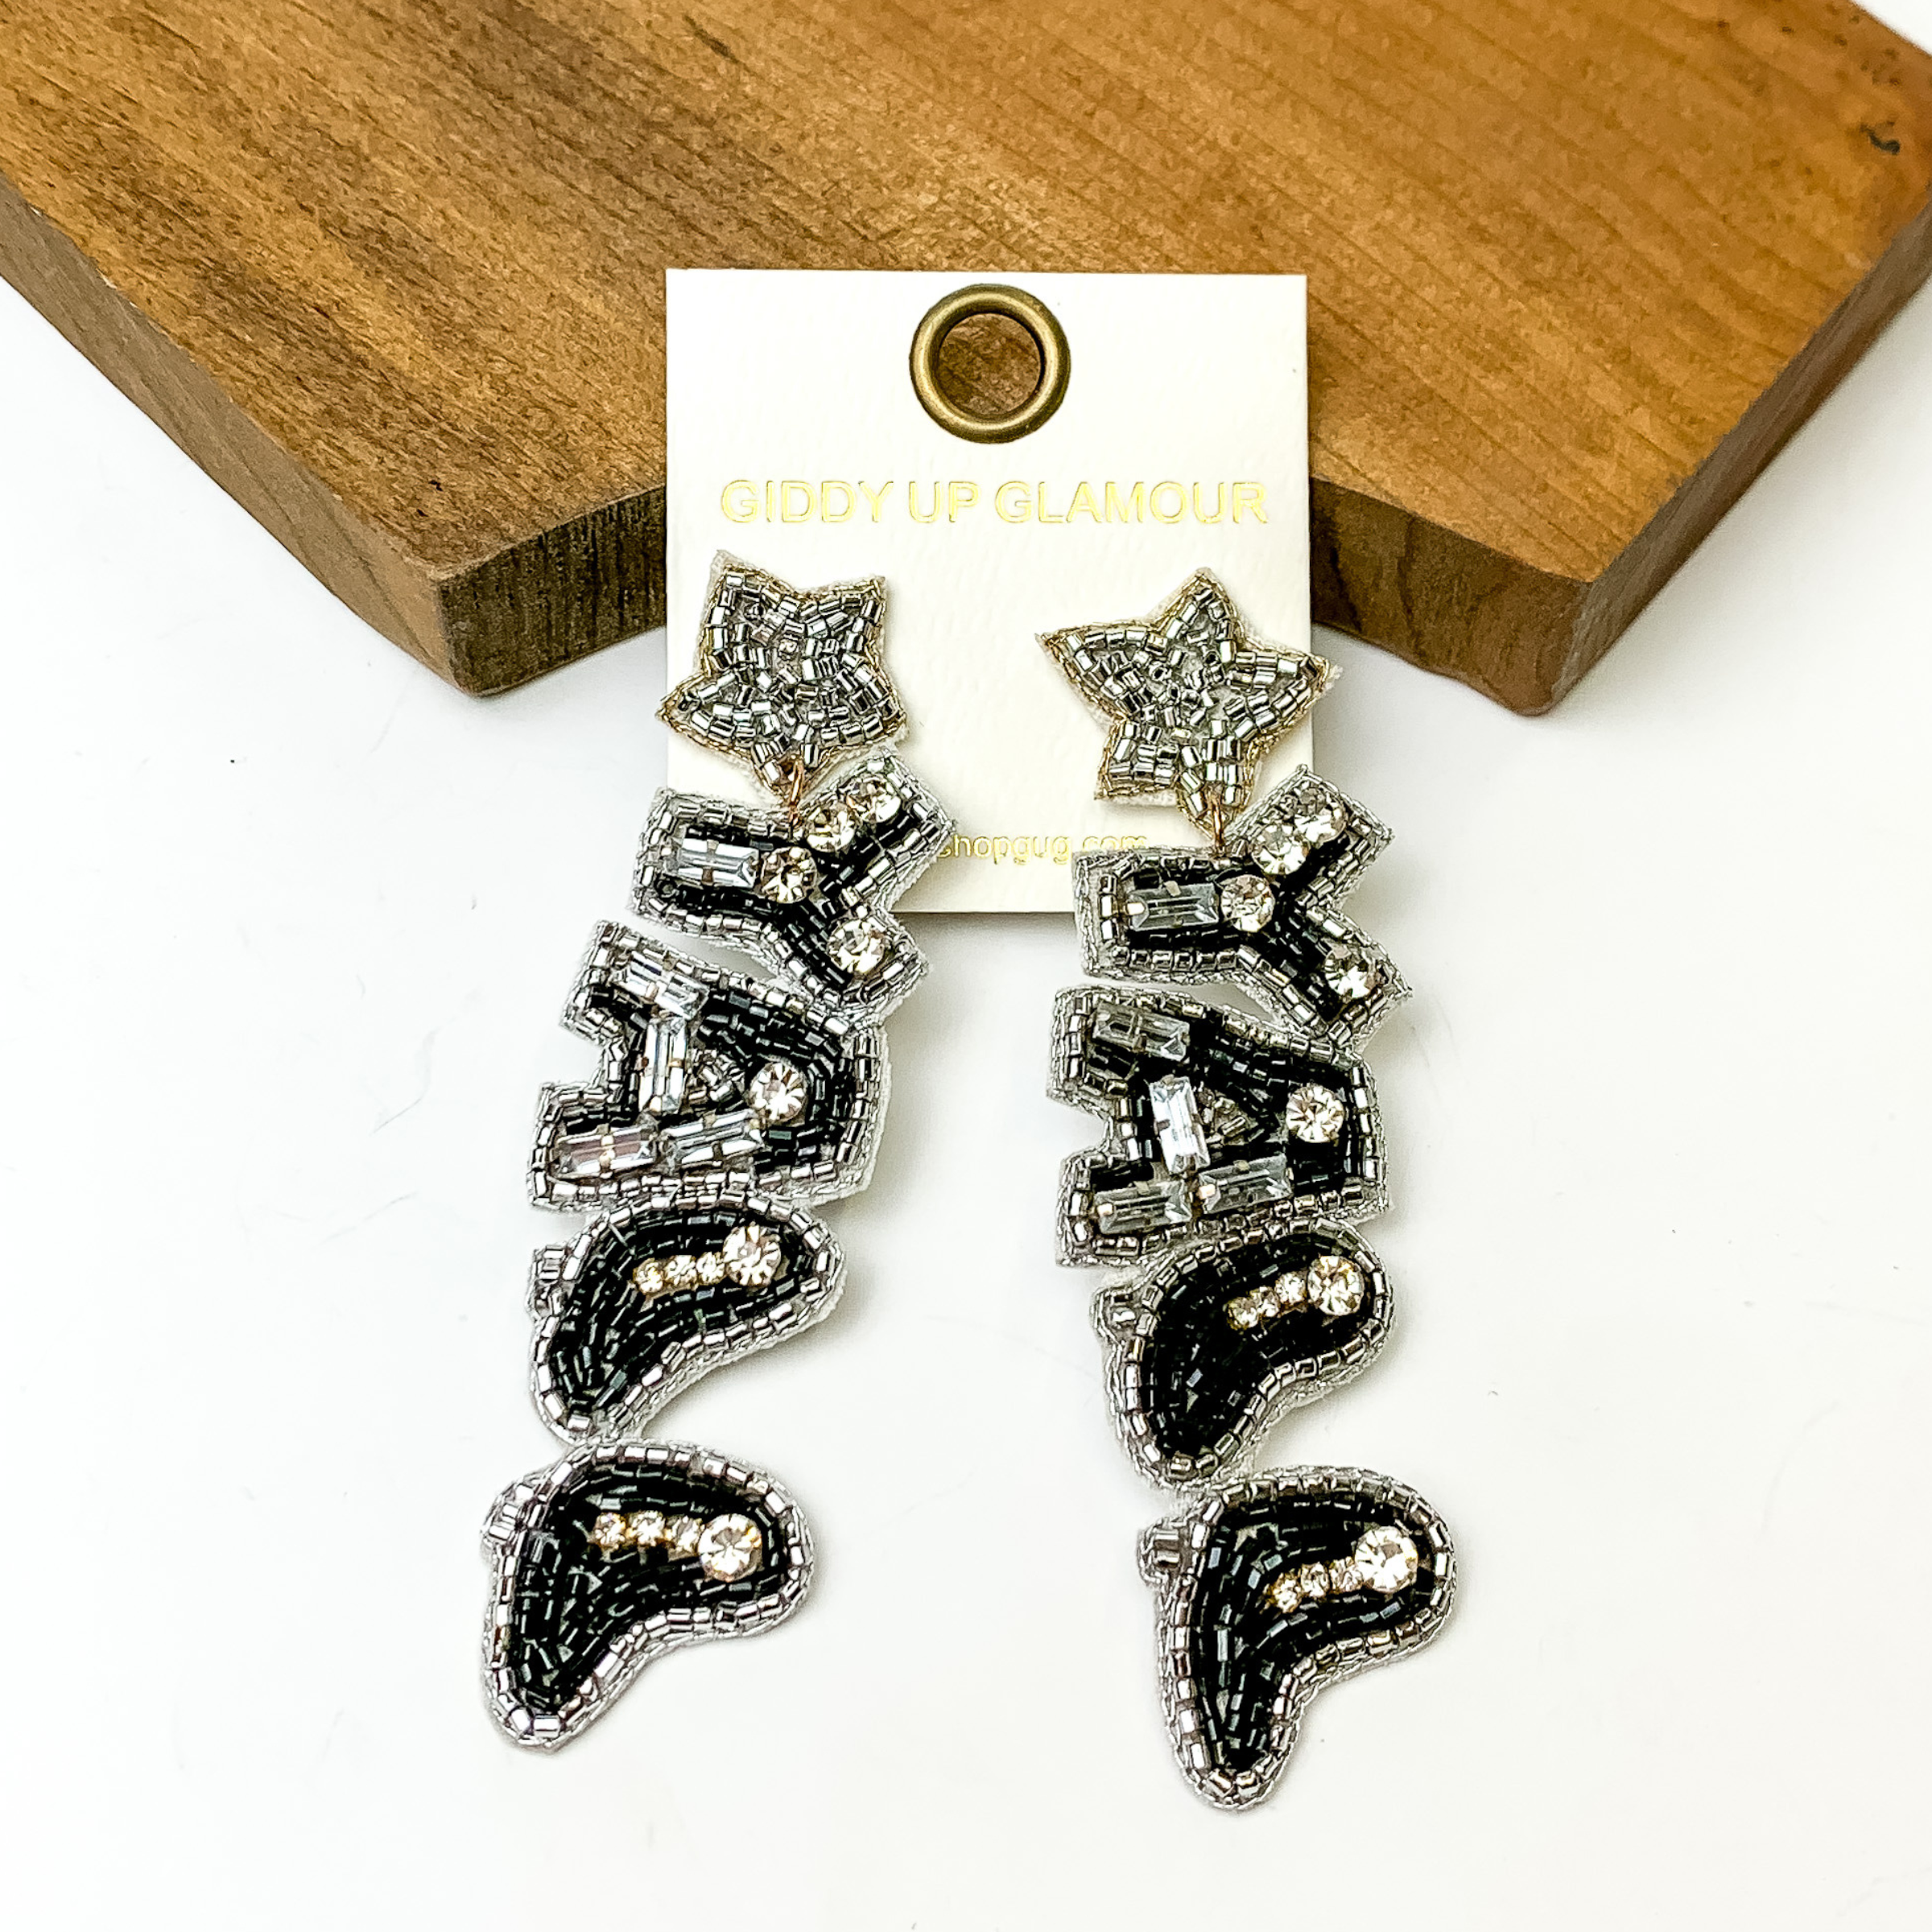 Silver beaded star post back earrings with a hanging pendant that spells out "YALL". The word is mosty black beads outlines in silver and clear rystals throughout. The two "L"s are in the shape of boots. These earrings are pictured on a white background with a brown block at the top of the picture.